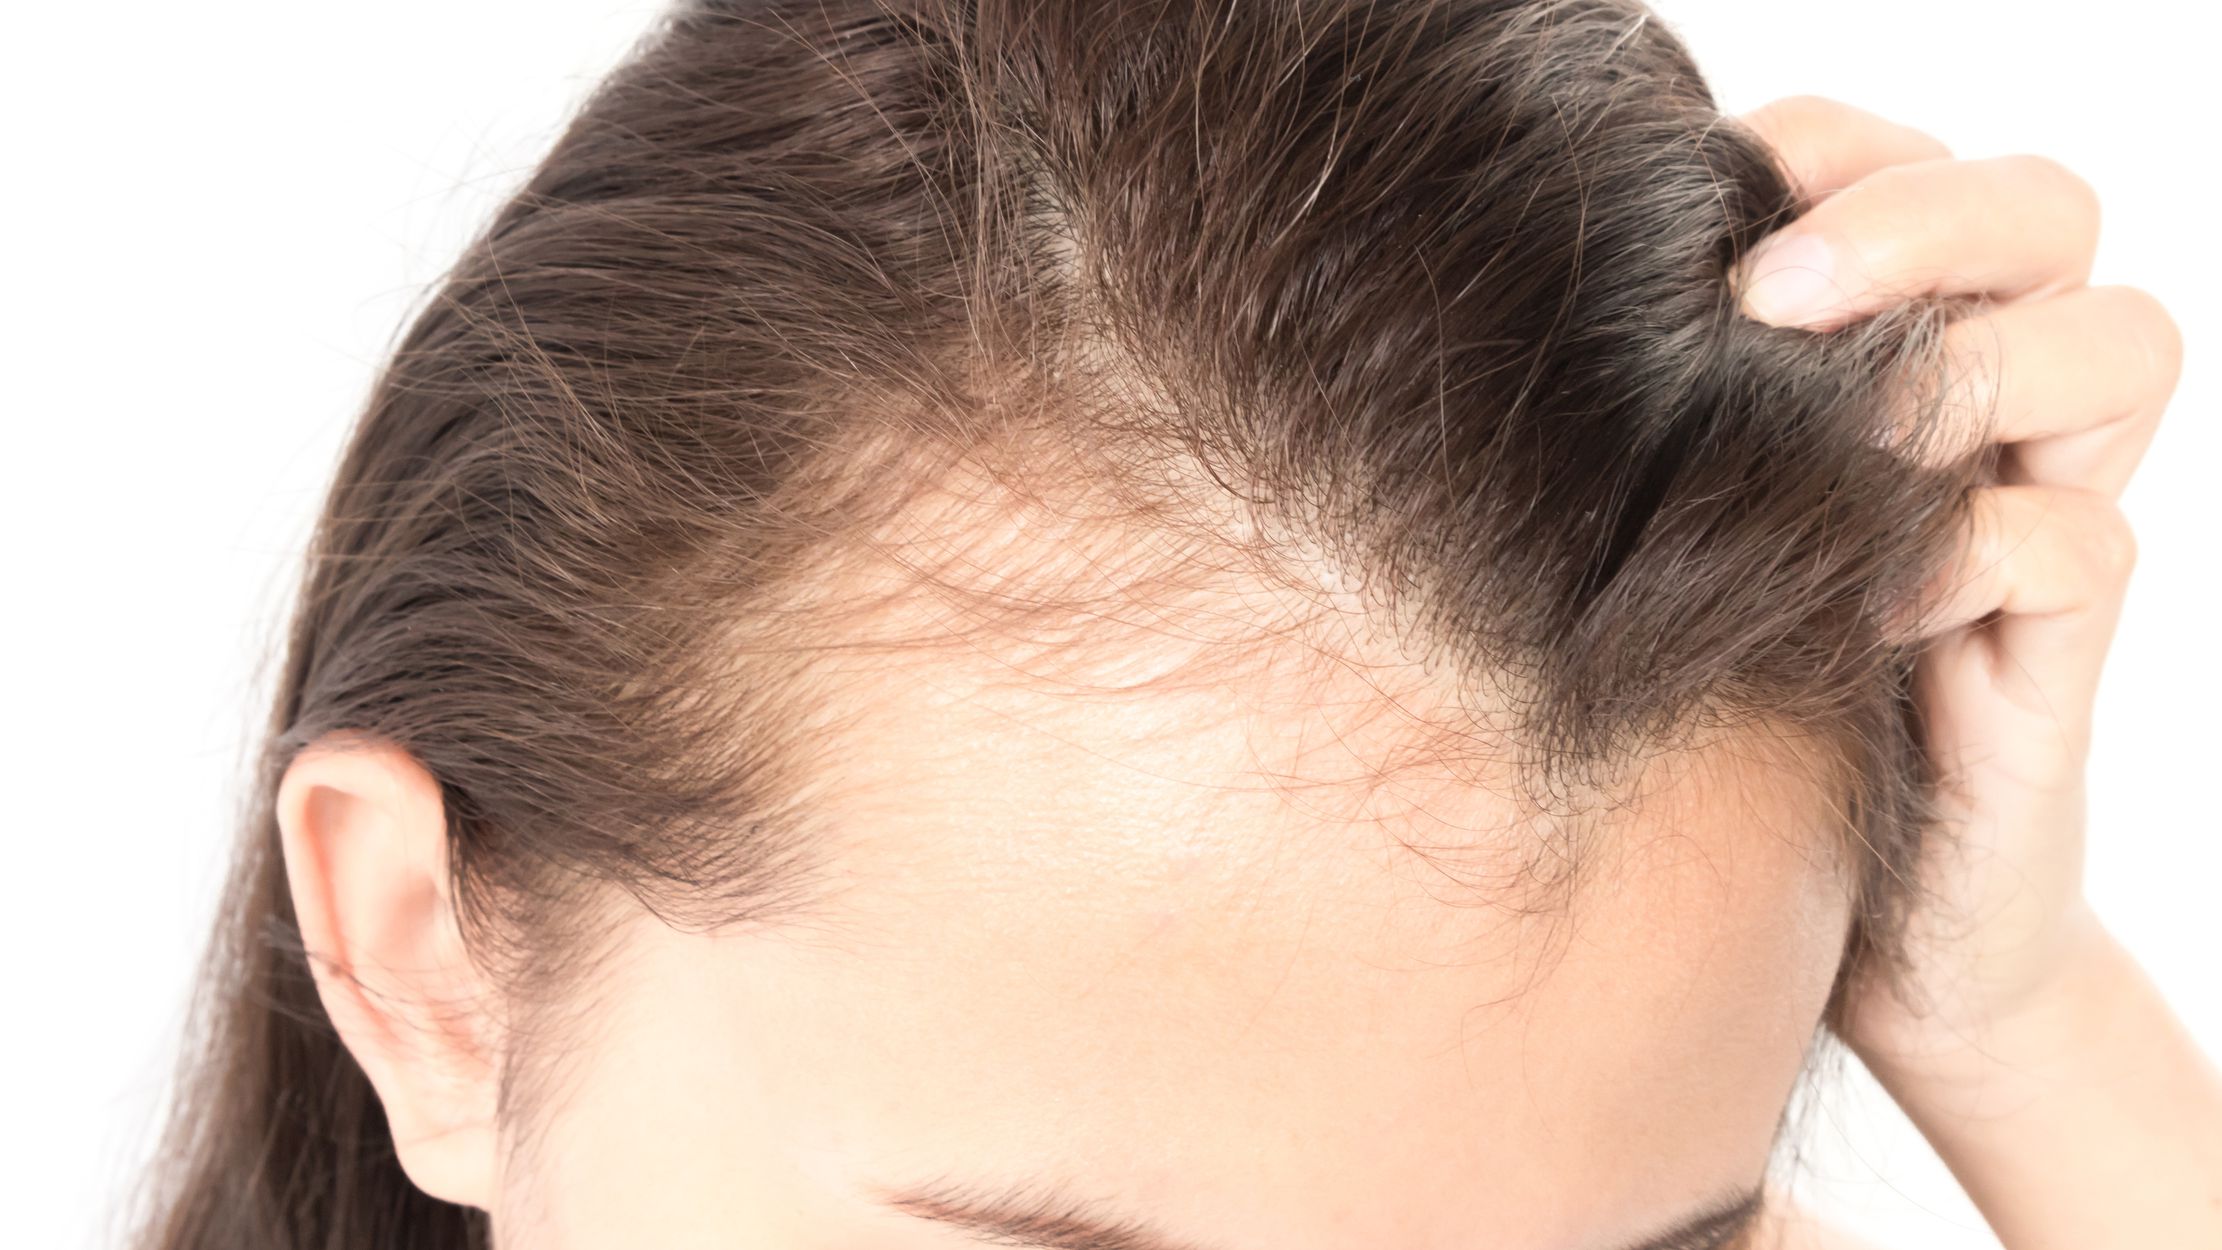 Can Fructose Malabsorption Cause Hair Loss